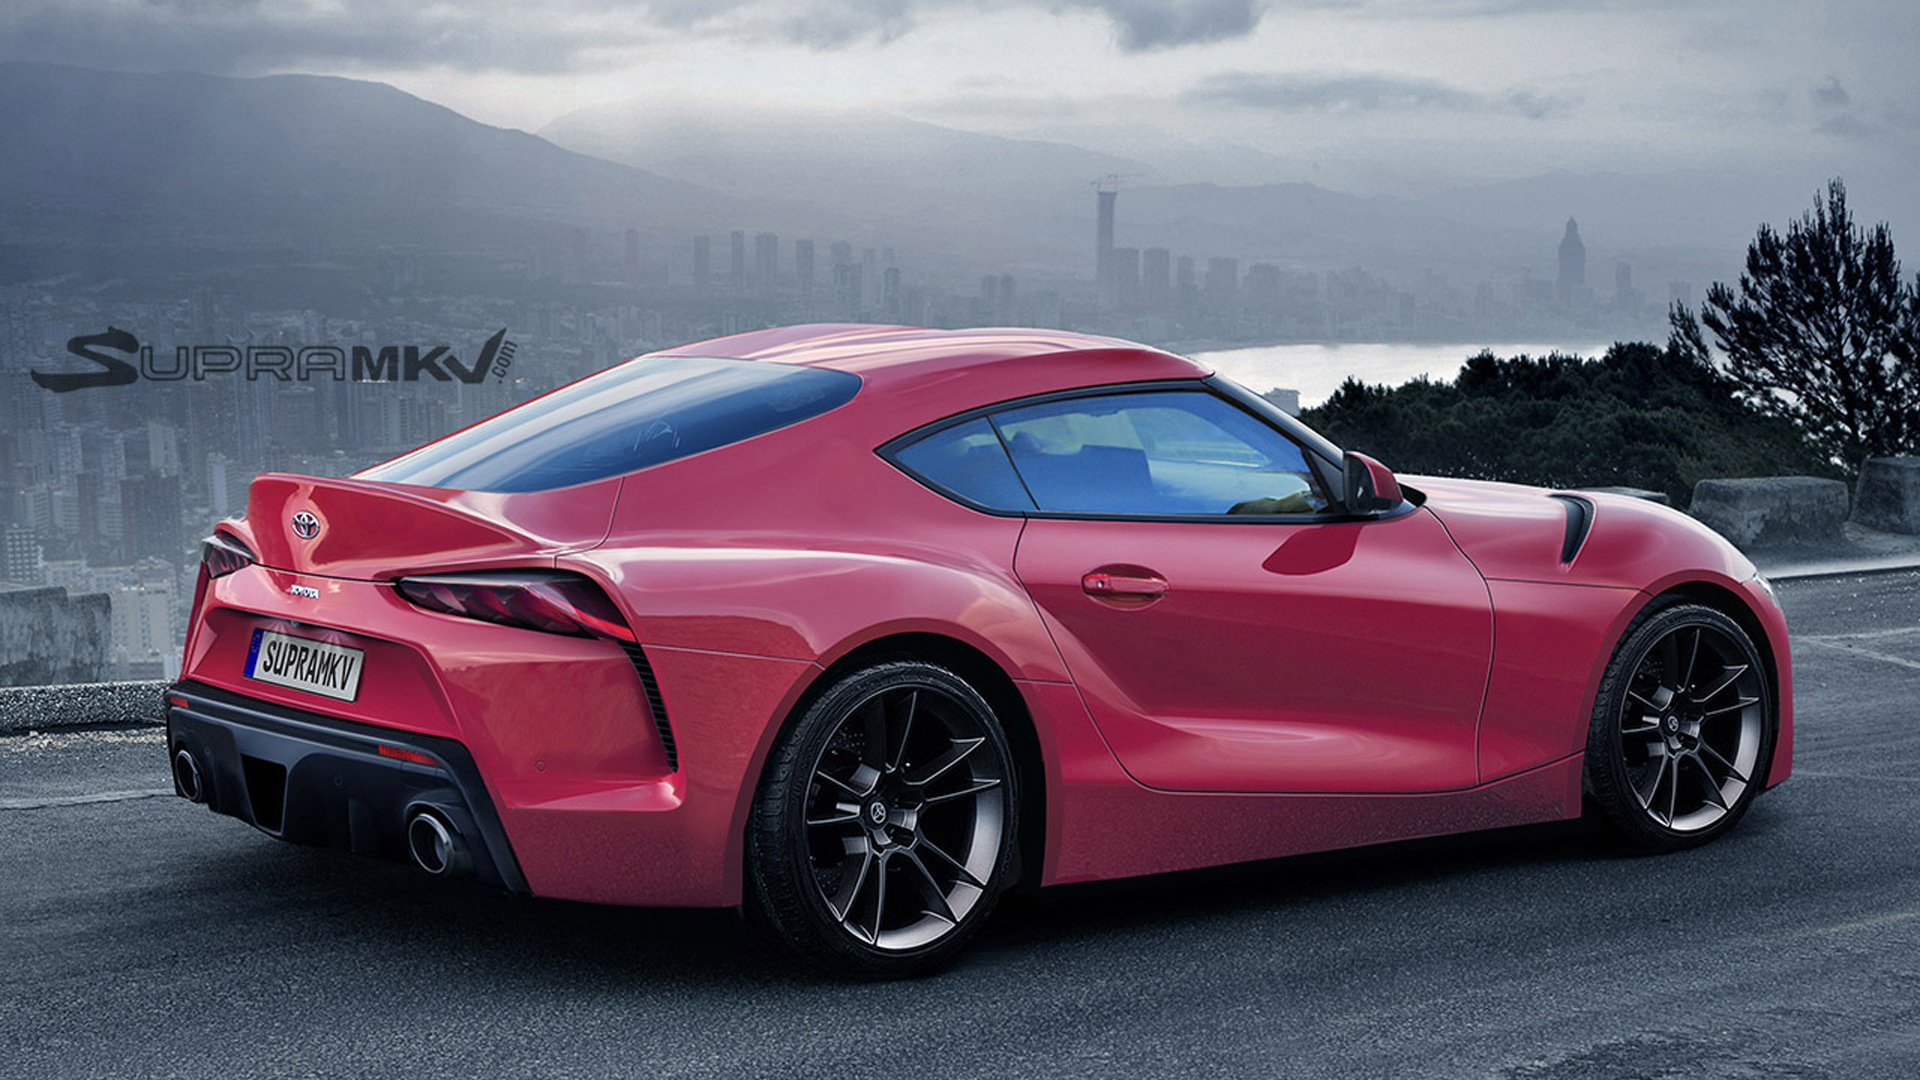 New Information Says 2019 Toyota Supra Will Get A Manual